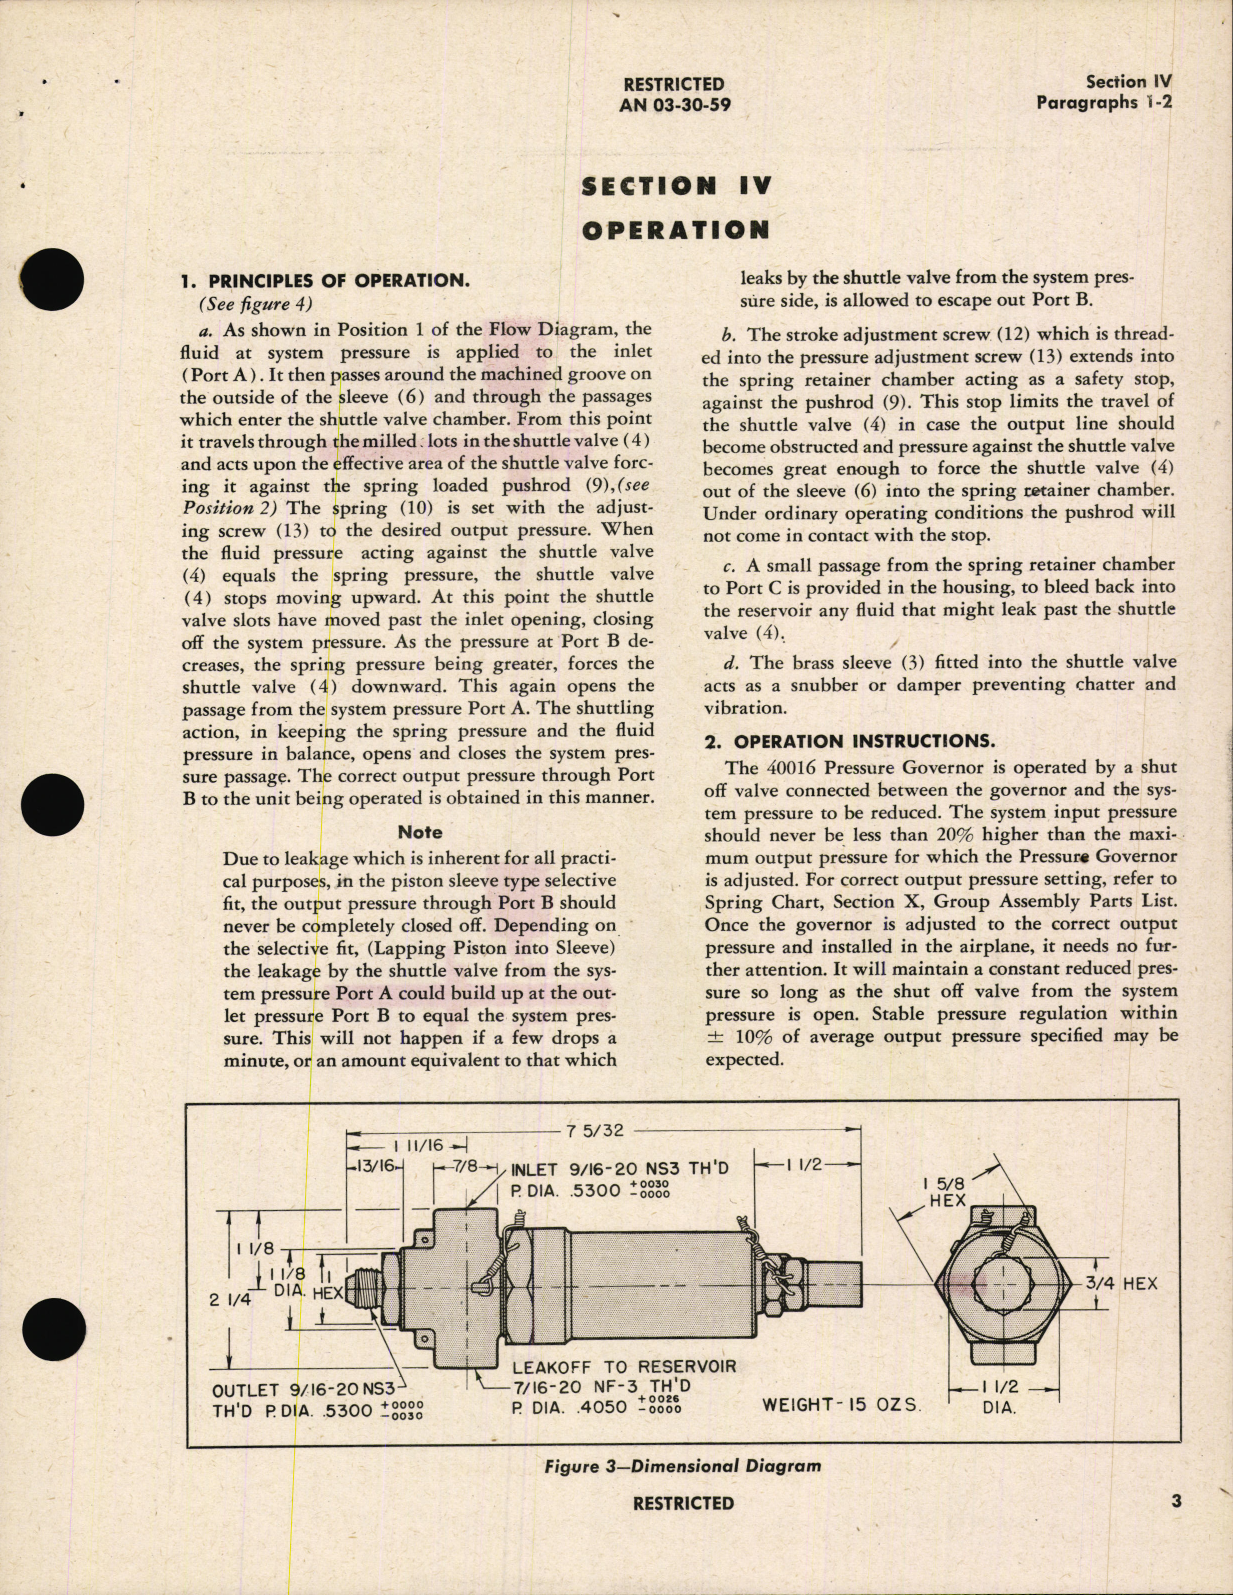 Sample page 7 from AirCorps Library document: Handbook of Instructions with Parts Catalog, Hydraulic System Pressure Governor